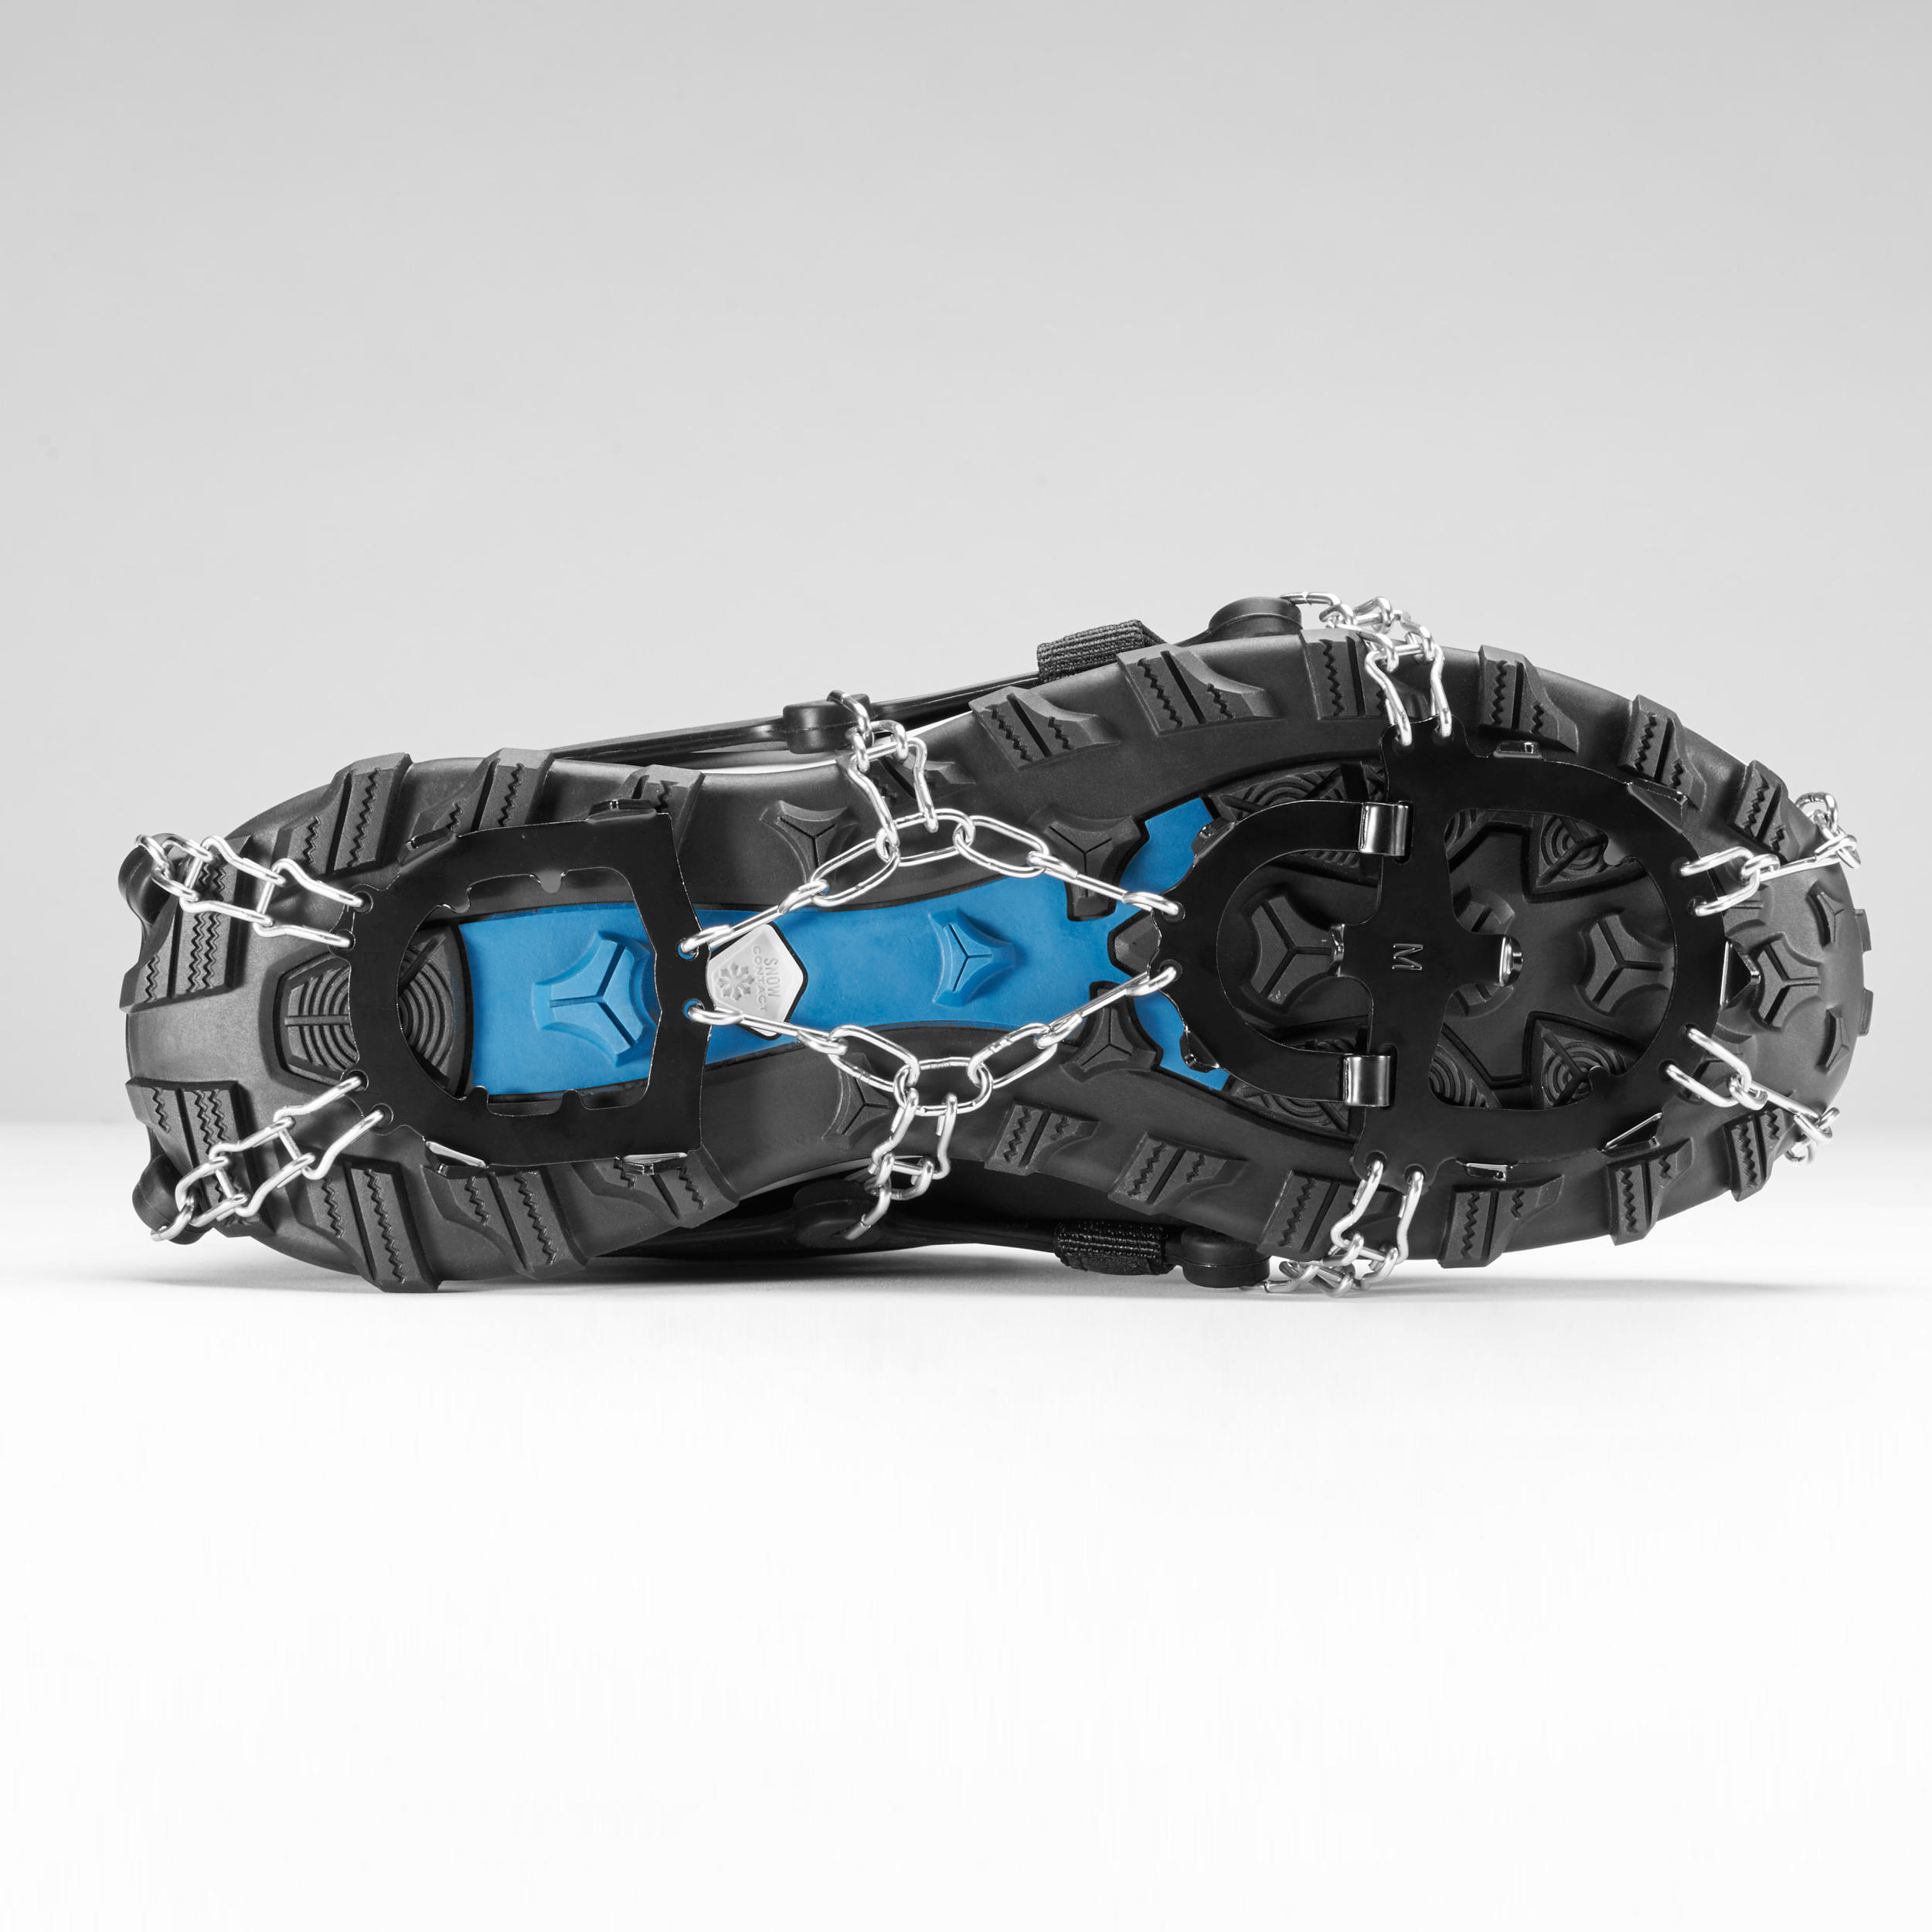 ADULT SNOW SHOES - SH900 - S TO XL 4/10